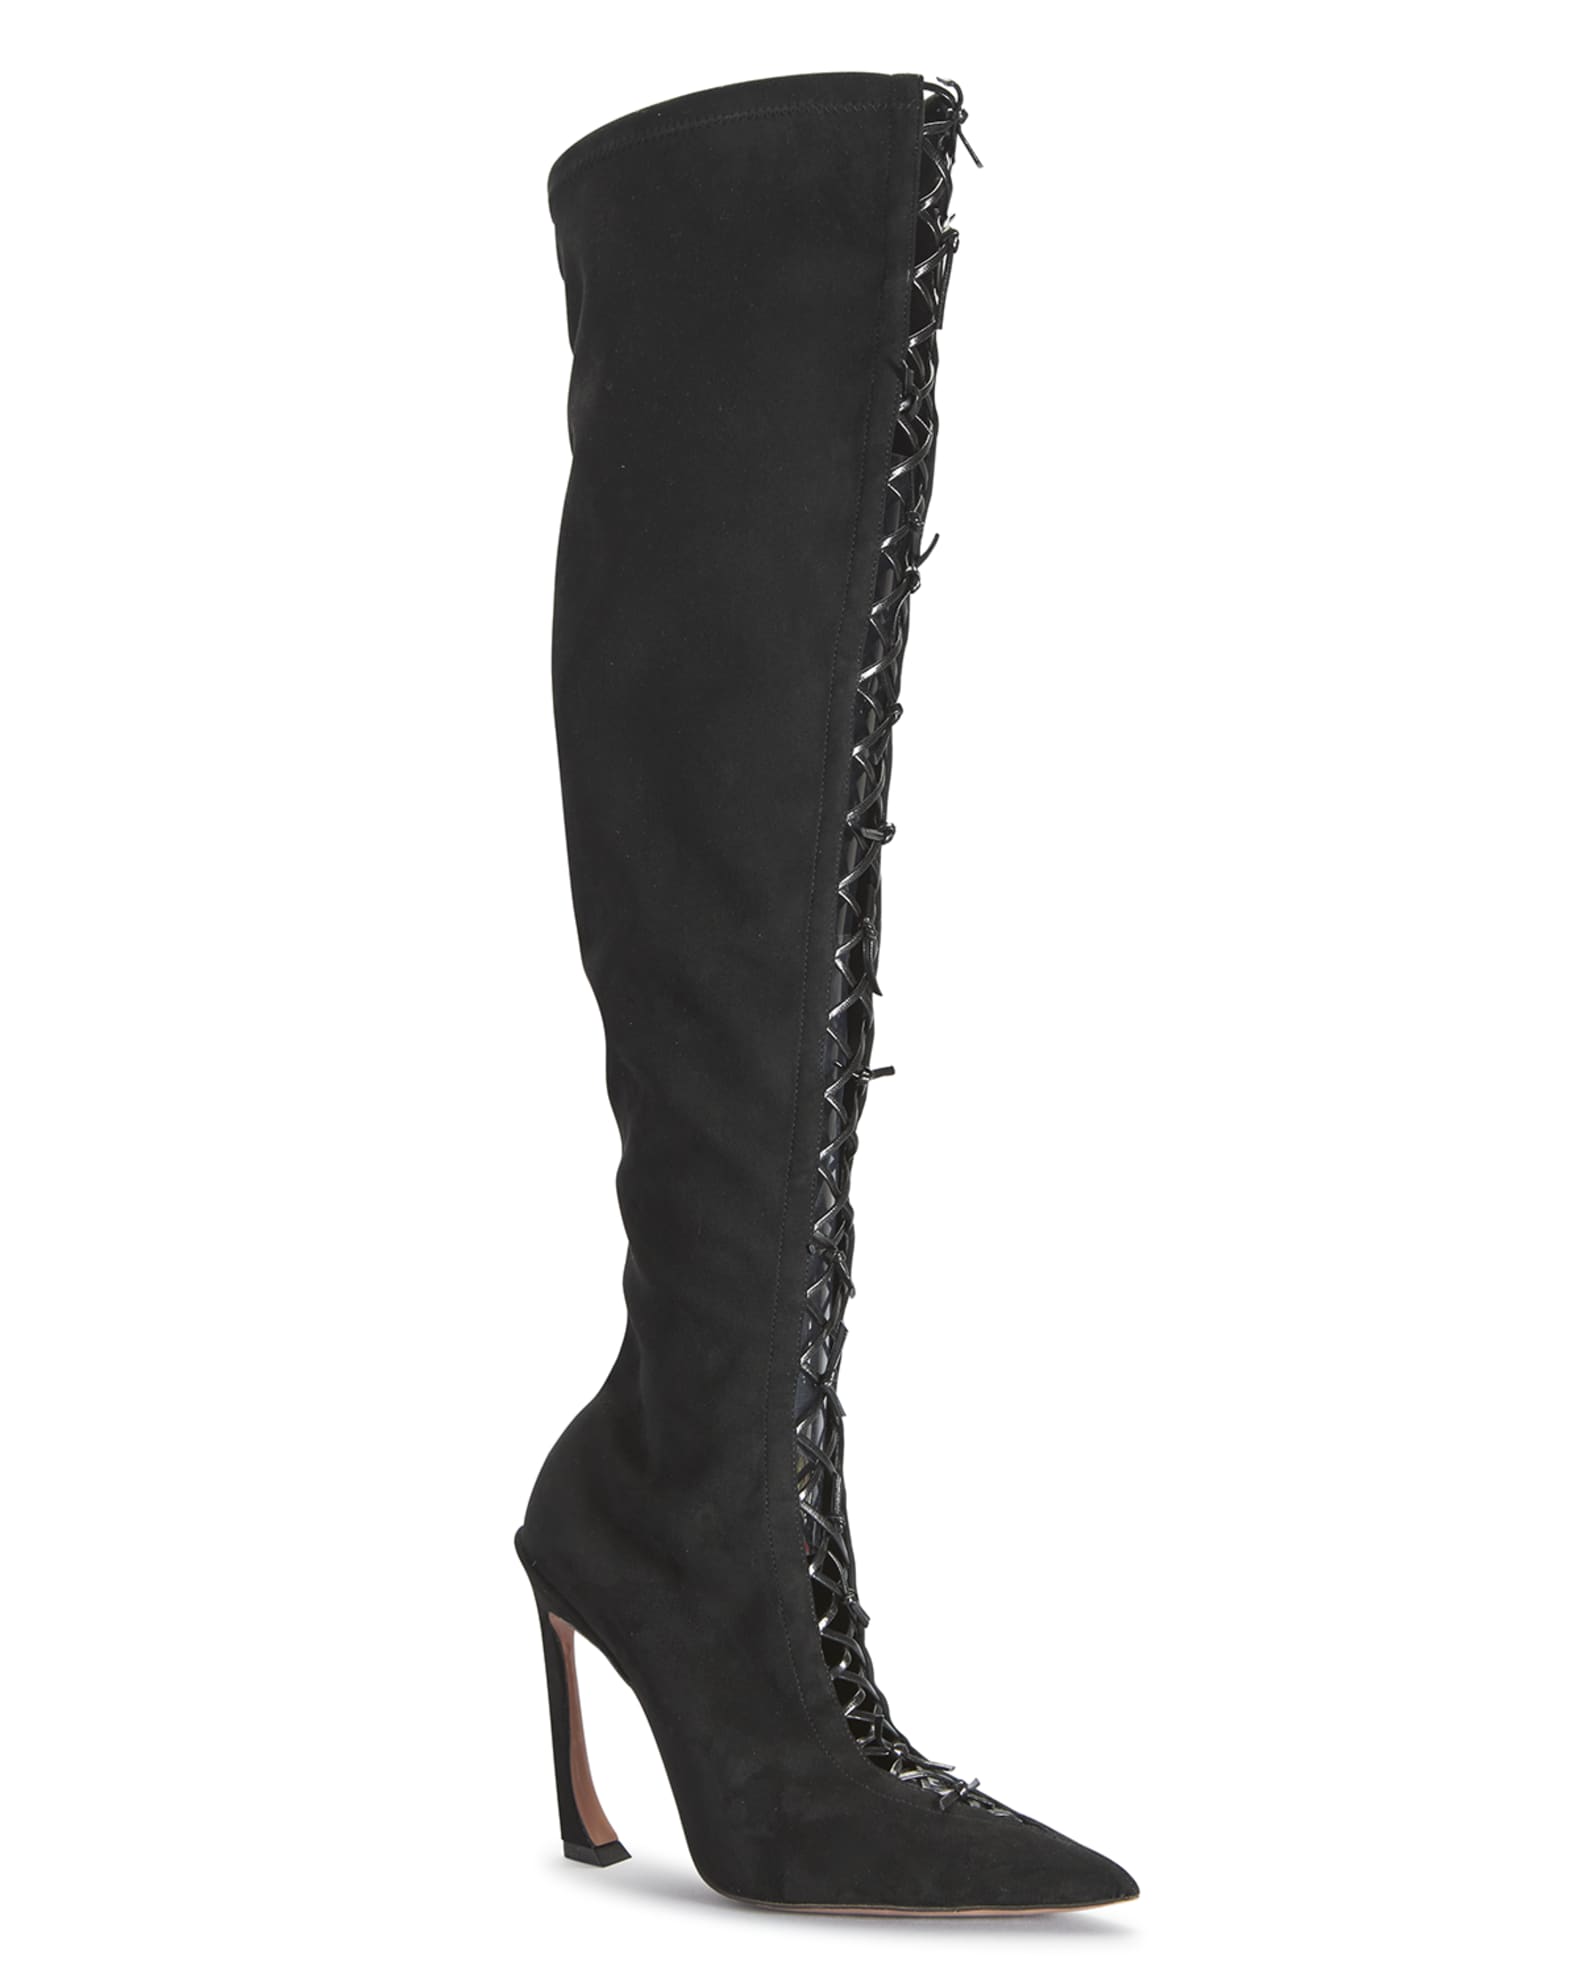 Piferi Love Me Knot Over-The-Knee Boots | Neiman Marcus